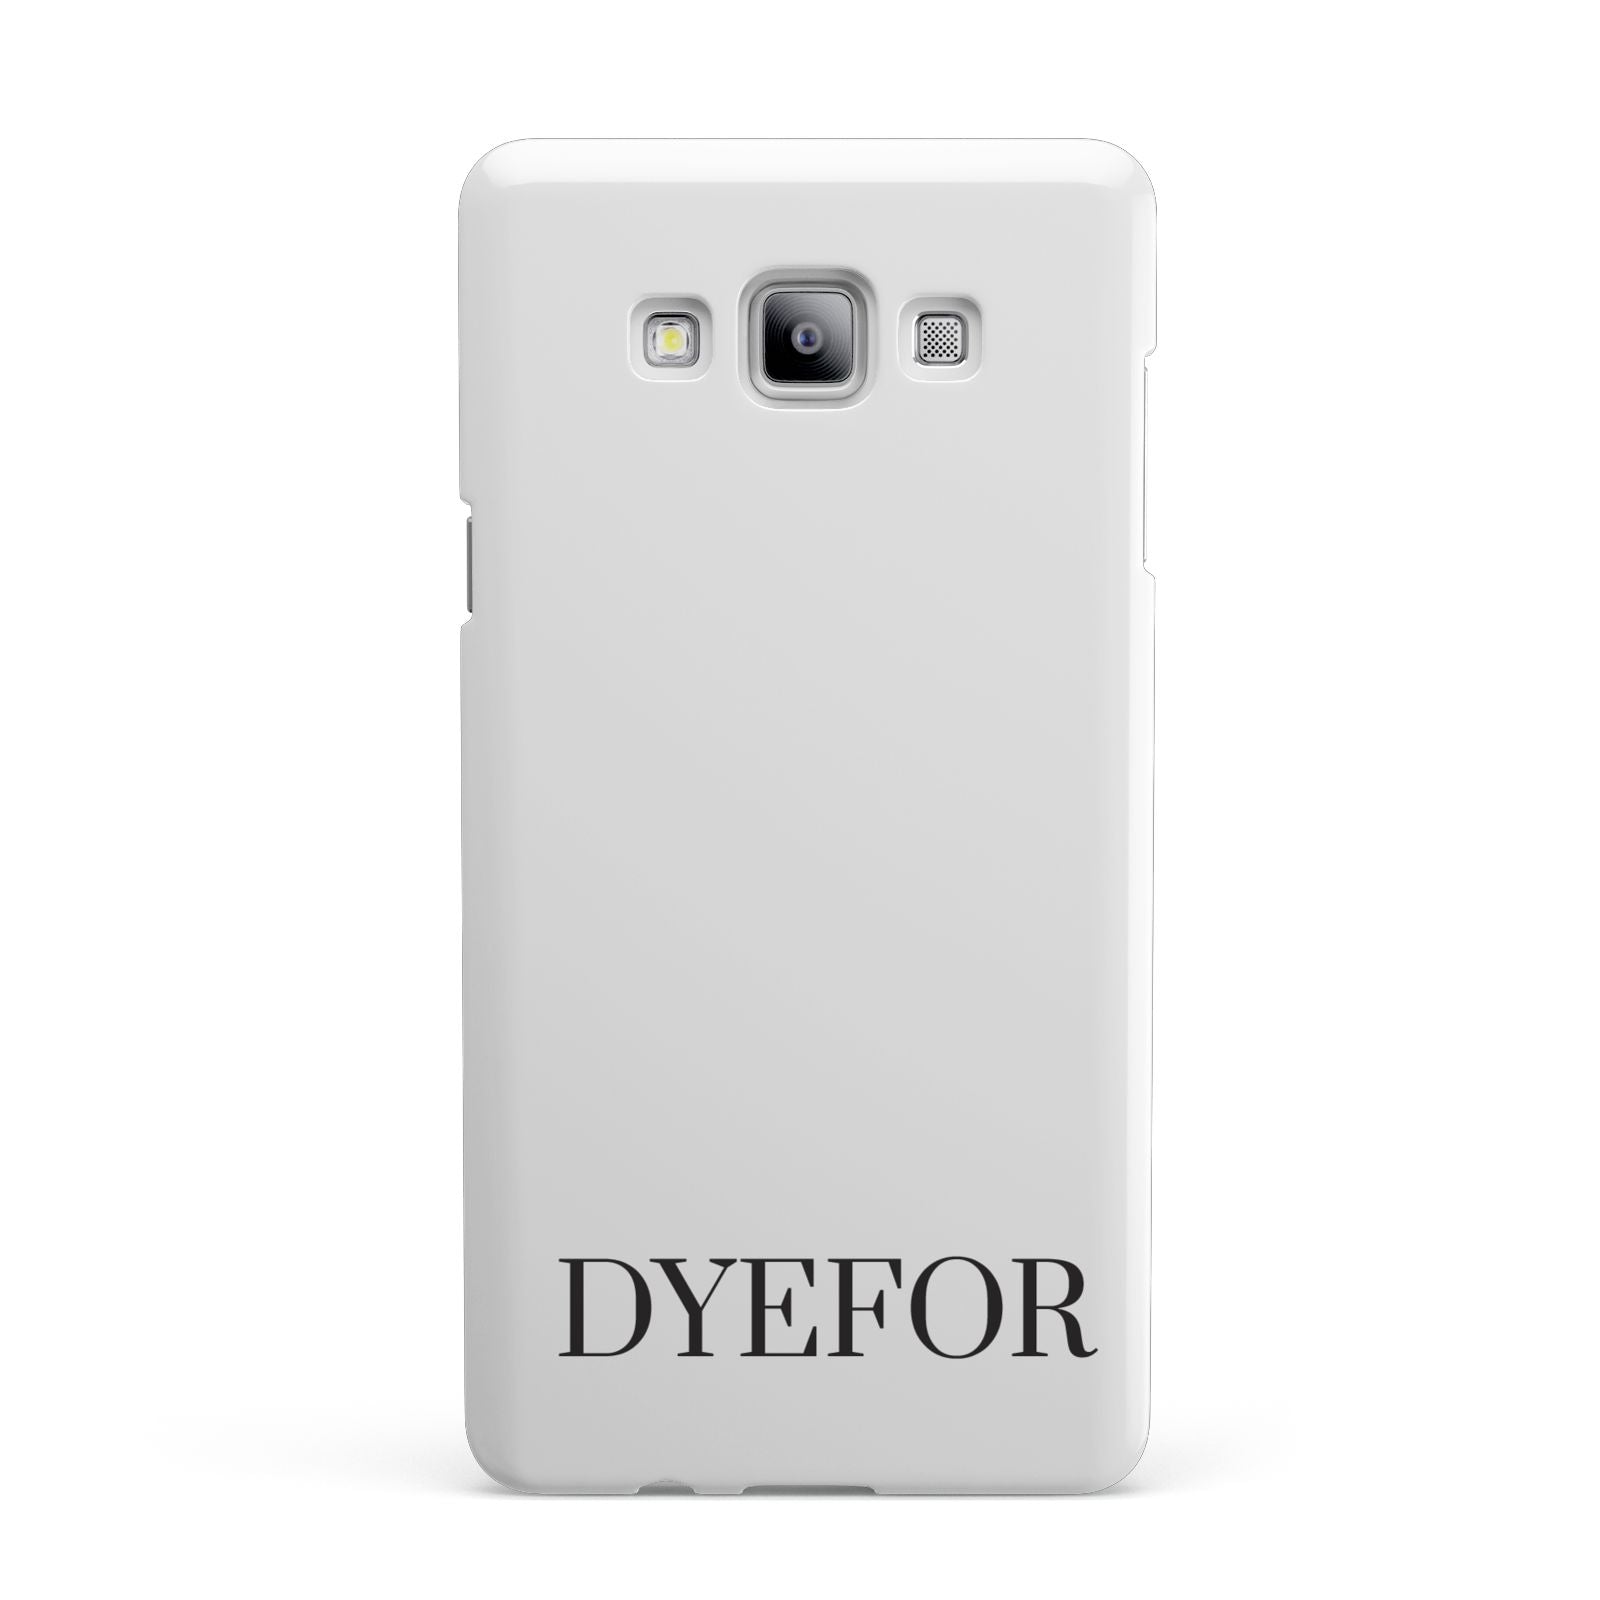 Name Personalised White Samsung Galaxy A7 2015 Case